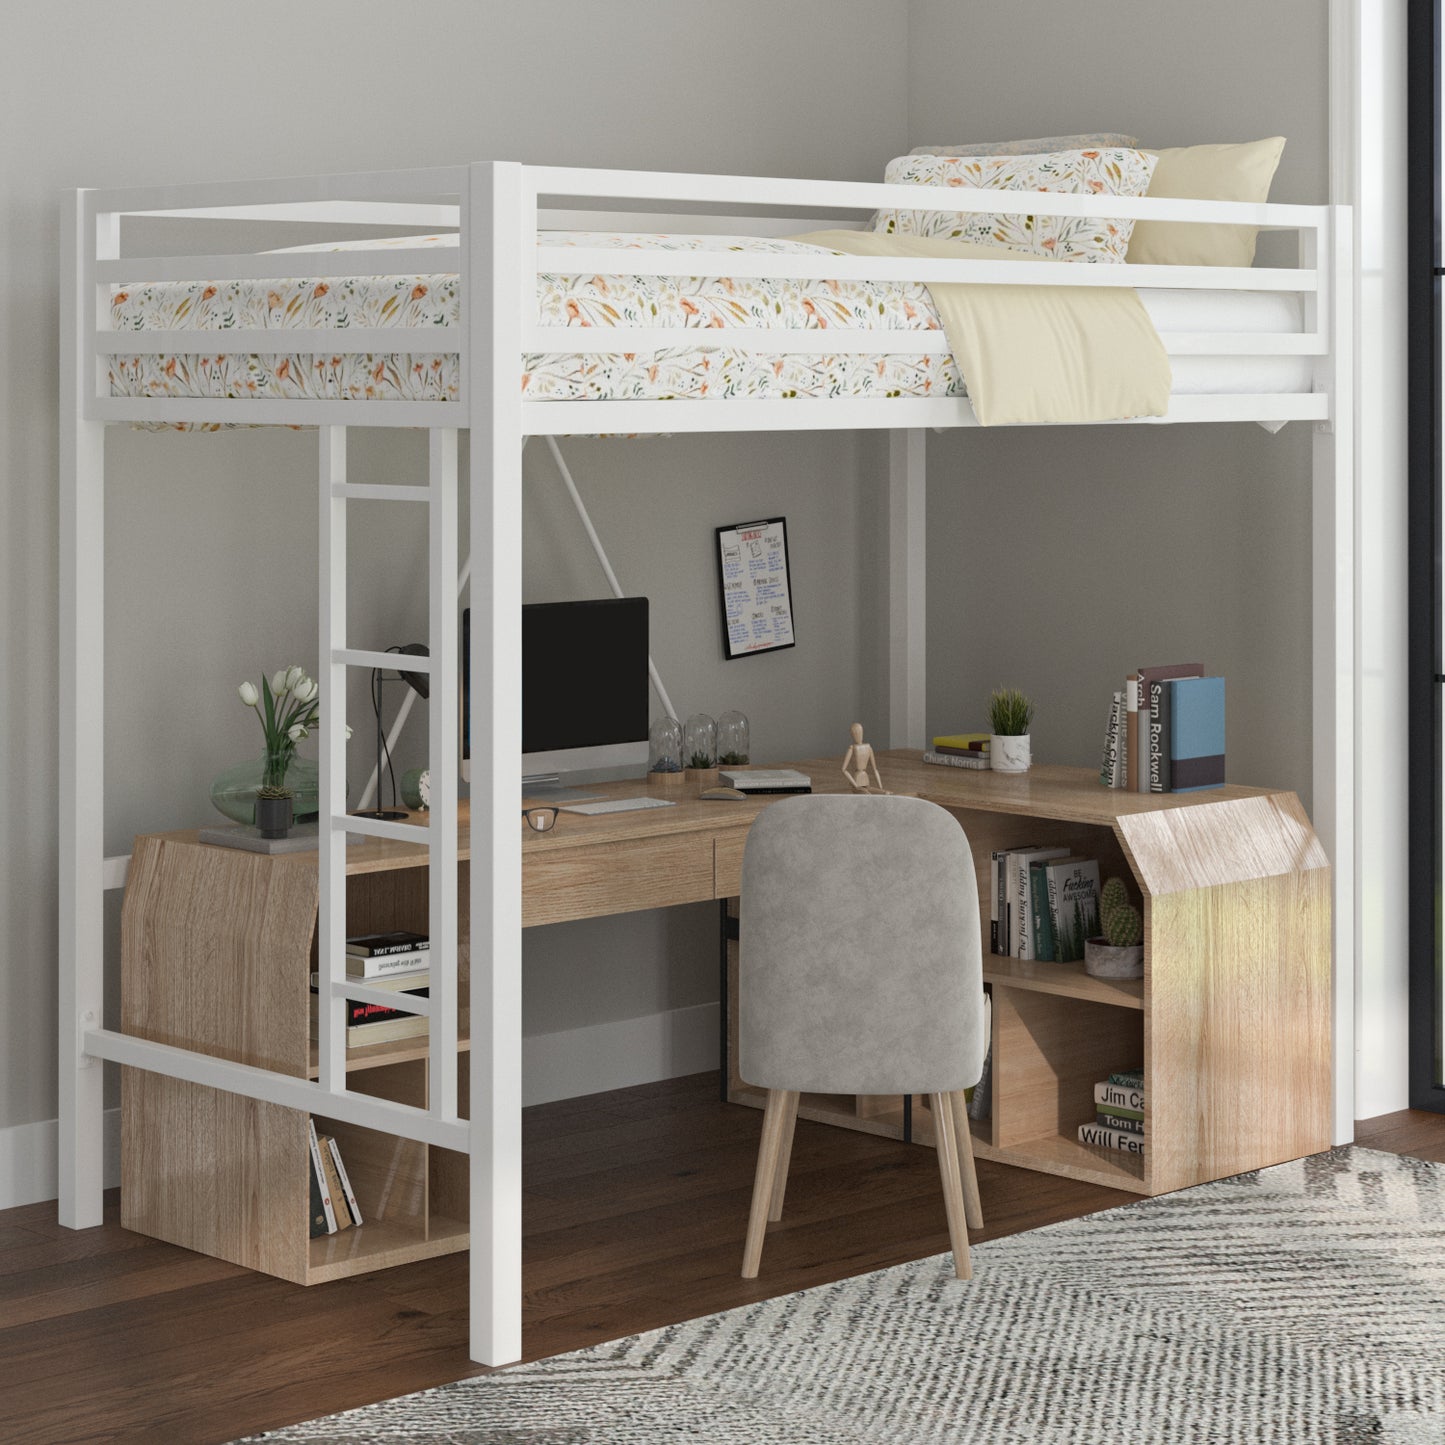 Allewie Heavy Duty Twin Size Loft Bed Frame with Full-Length Guardrail& Removable Stairs, Noise Free